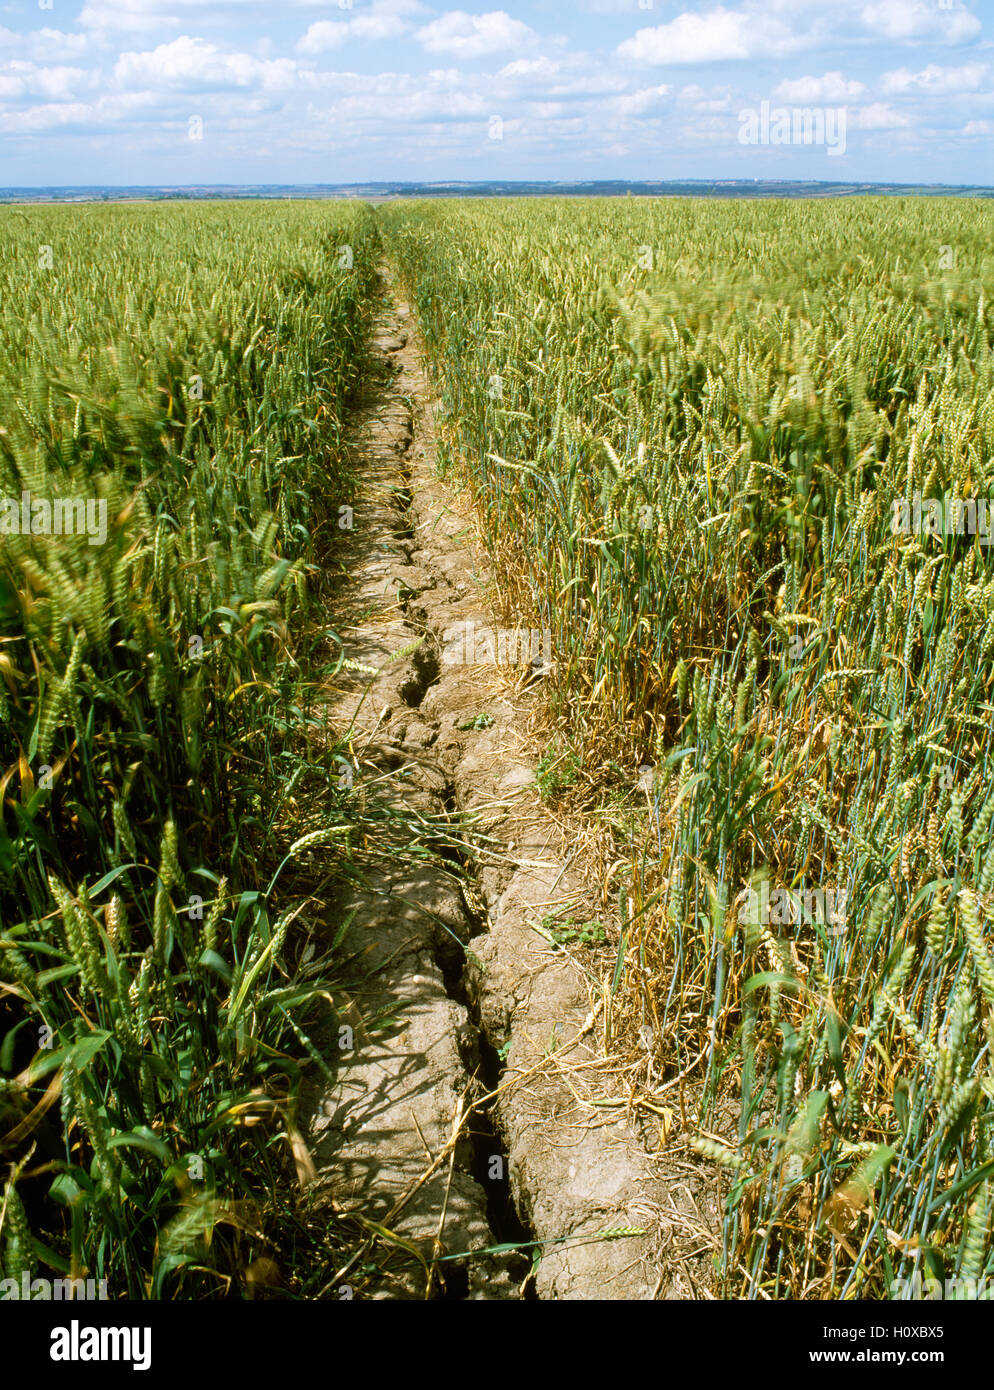 Public footpath running through a wheat field on Beacon Hill near the village of Canewdon, Essex, England, UK. Ground cracked by drought. Stock Photo